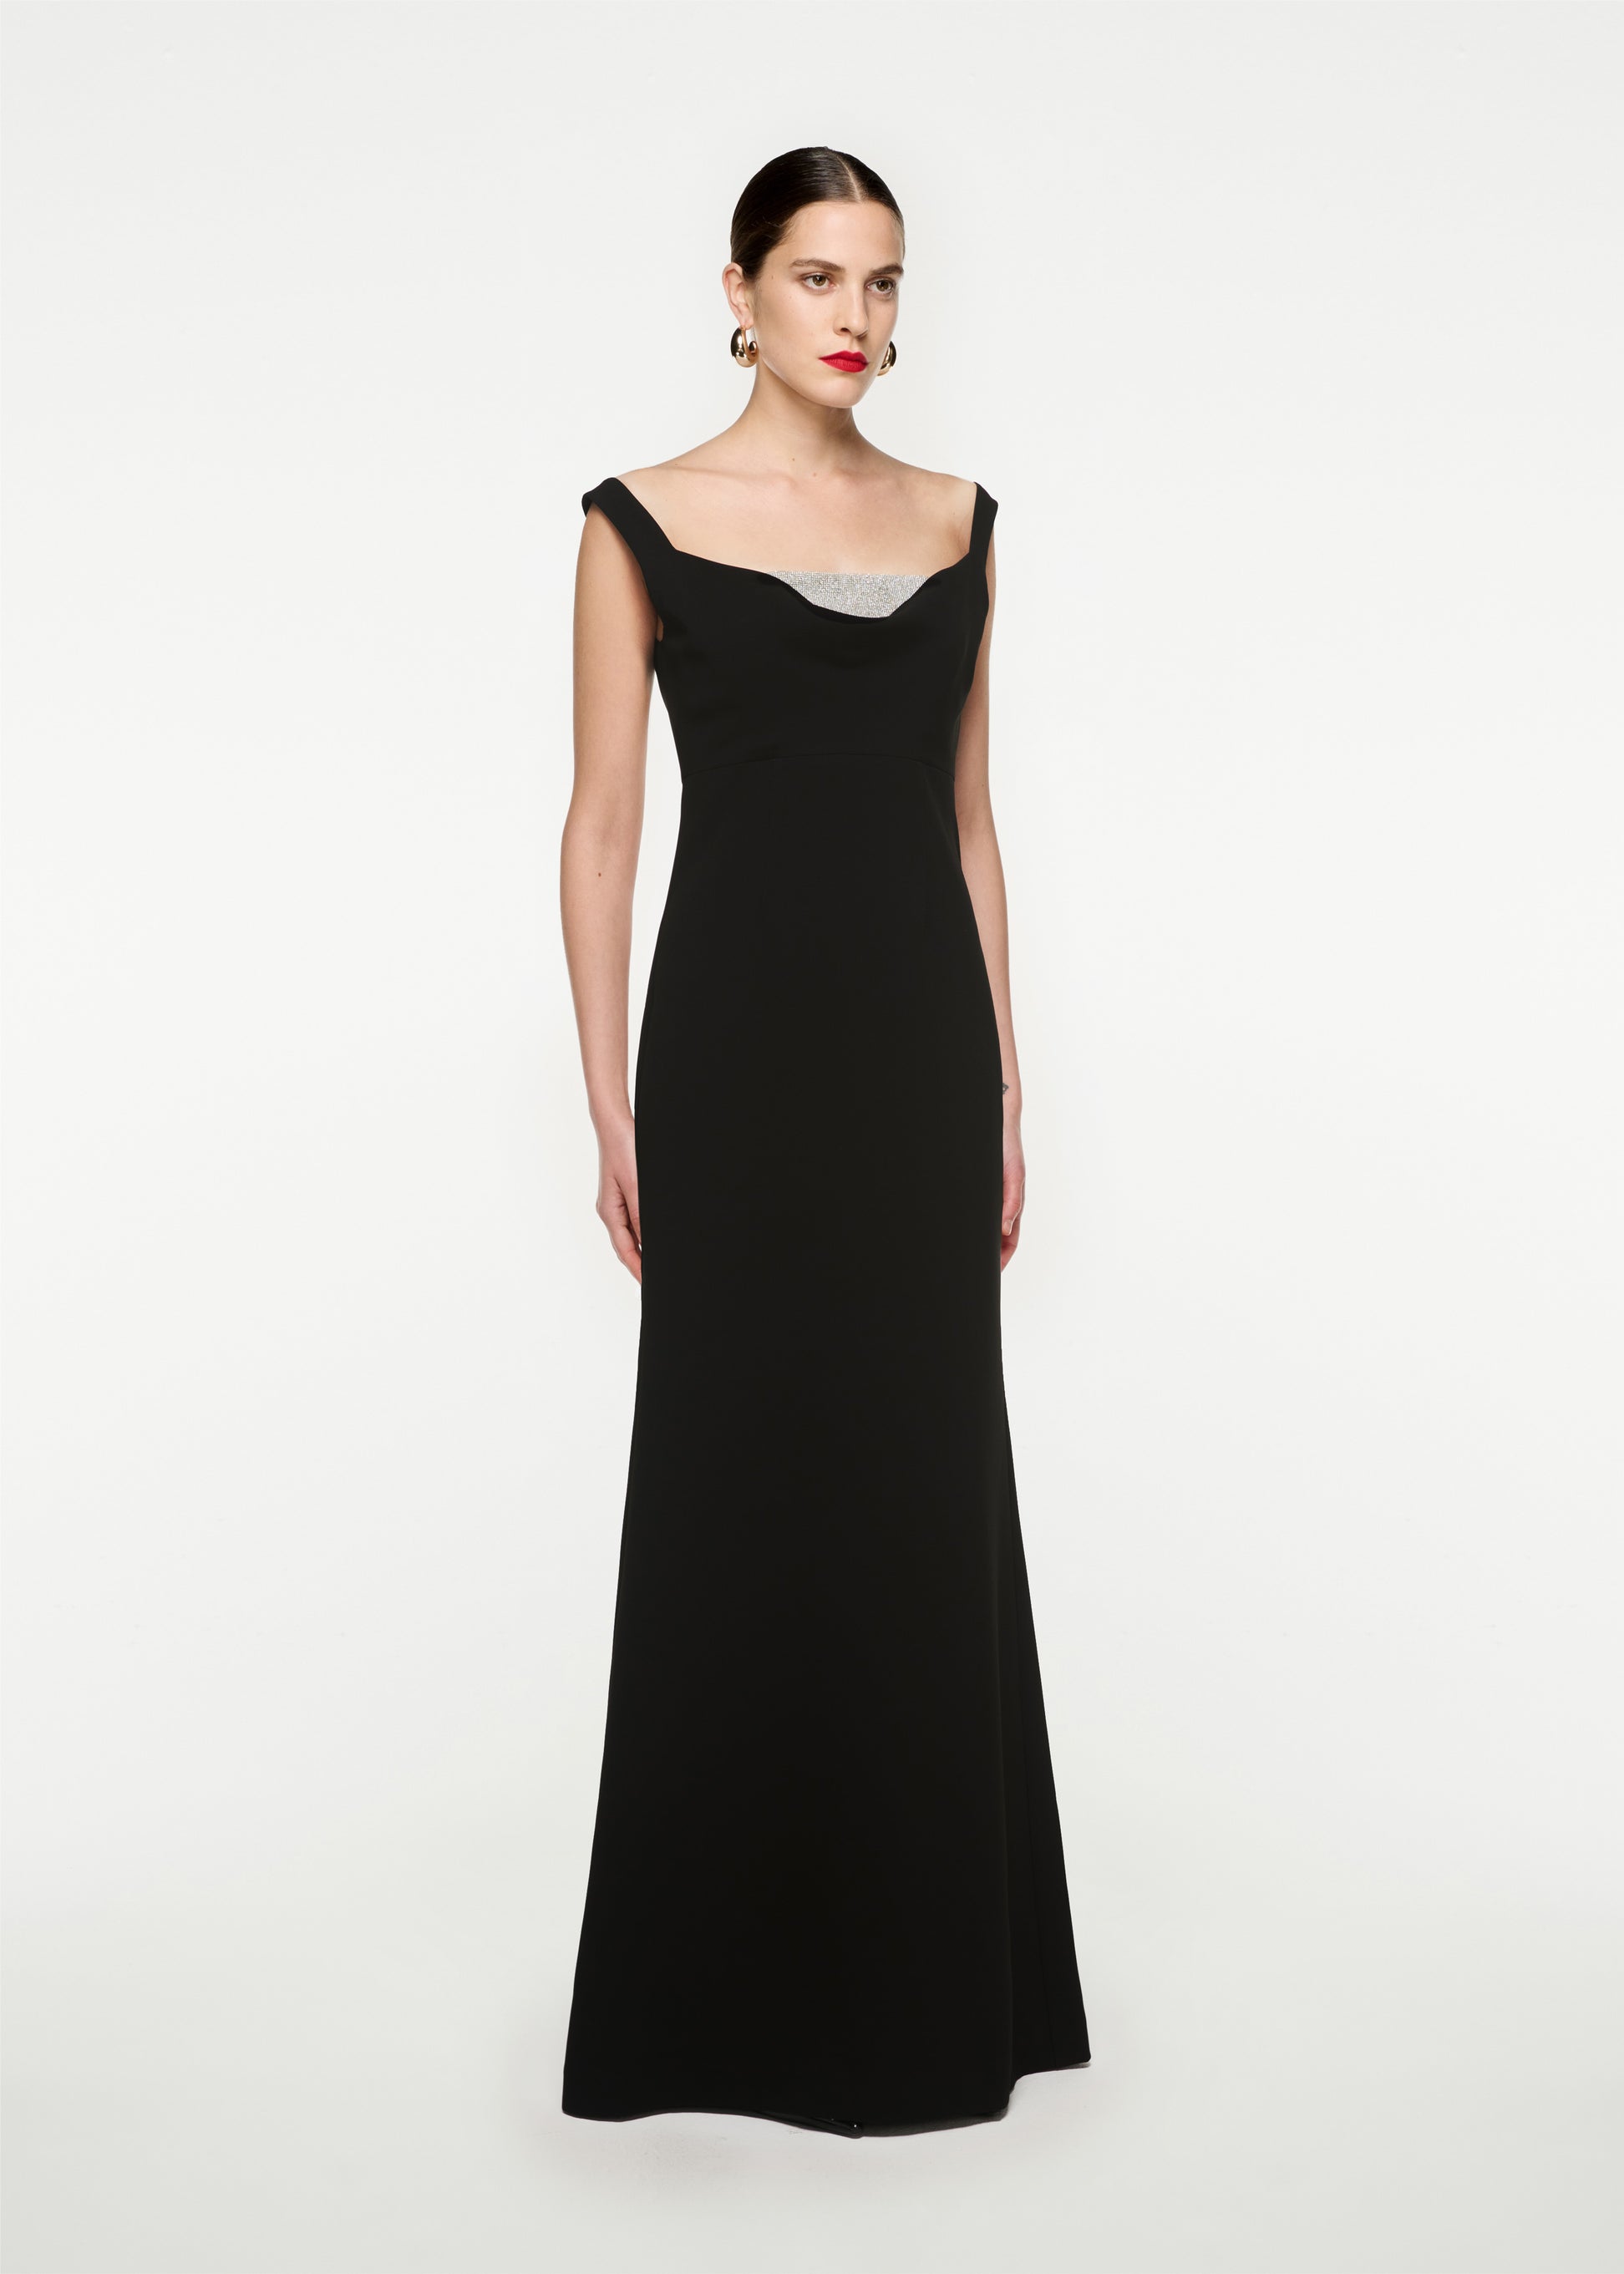 Woman wearing the Off Shoulder Cady Diamante Gown in Black